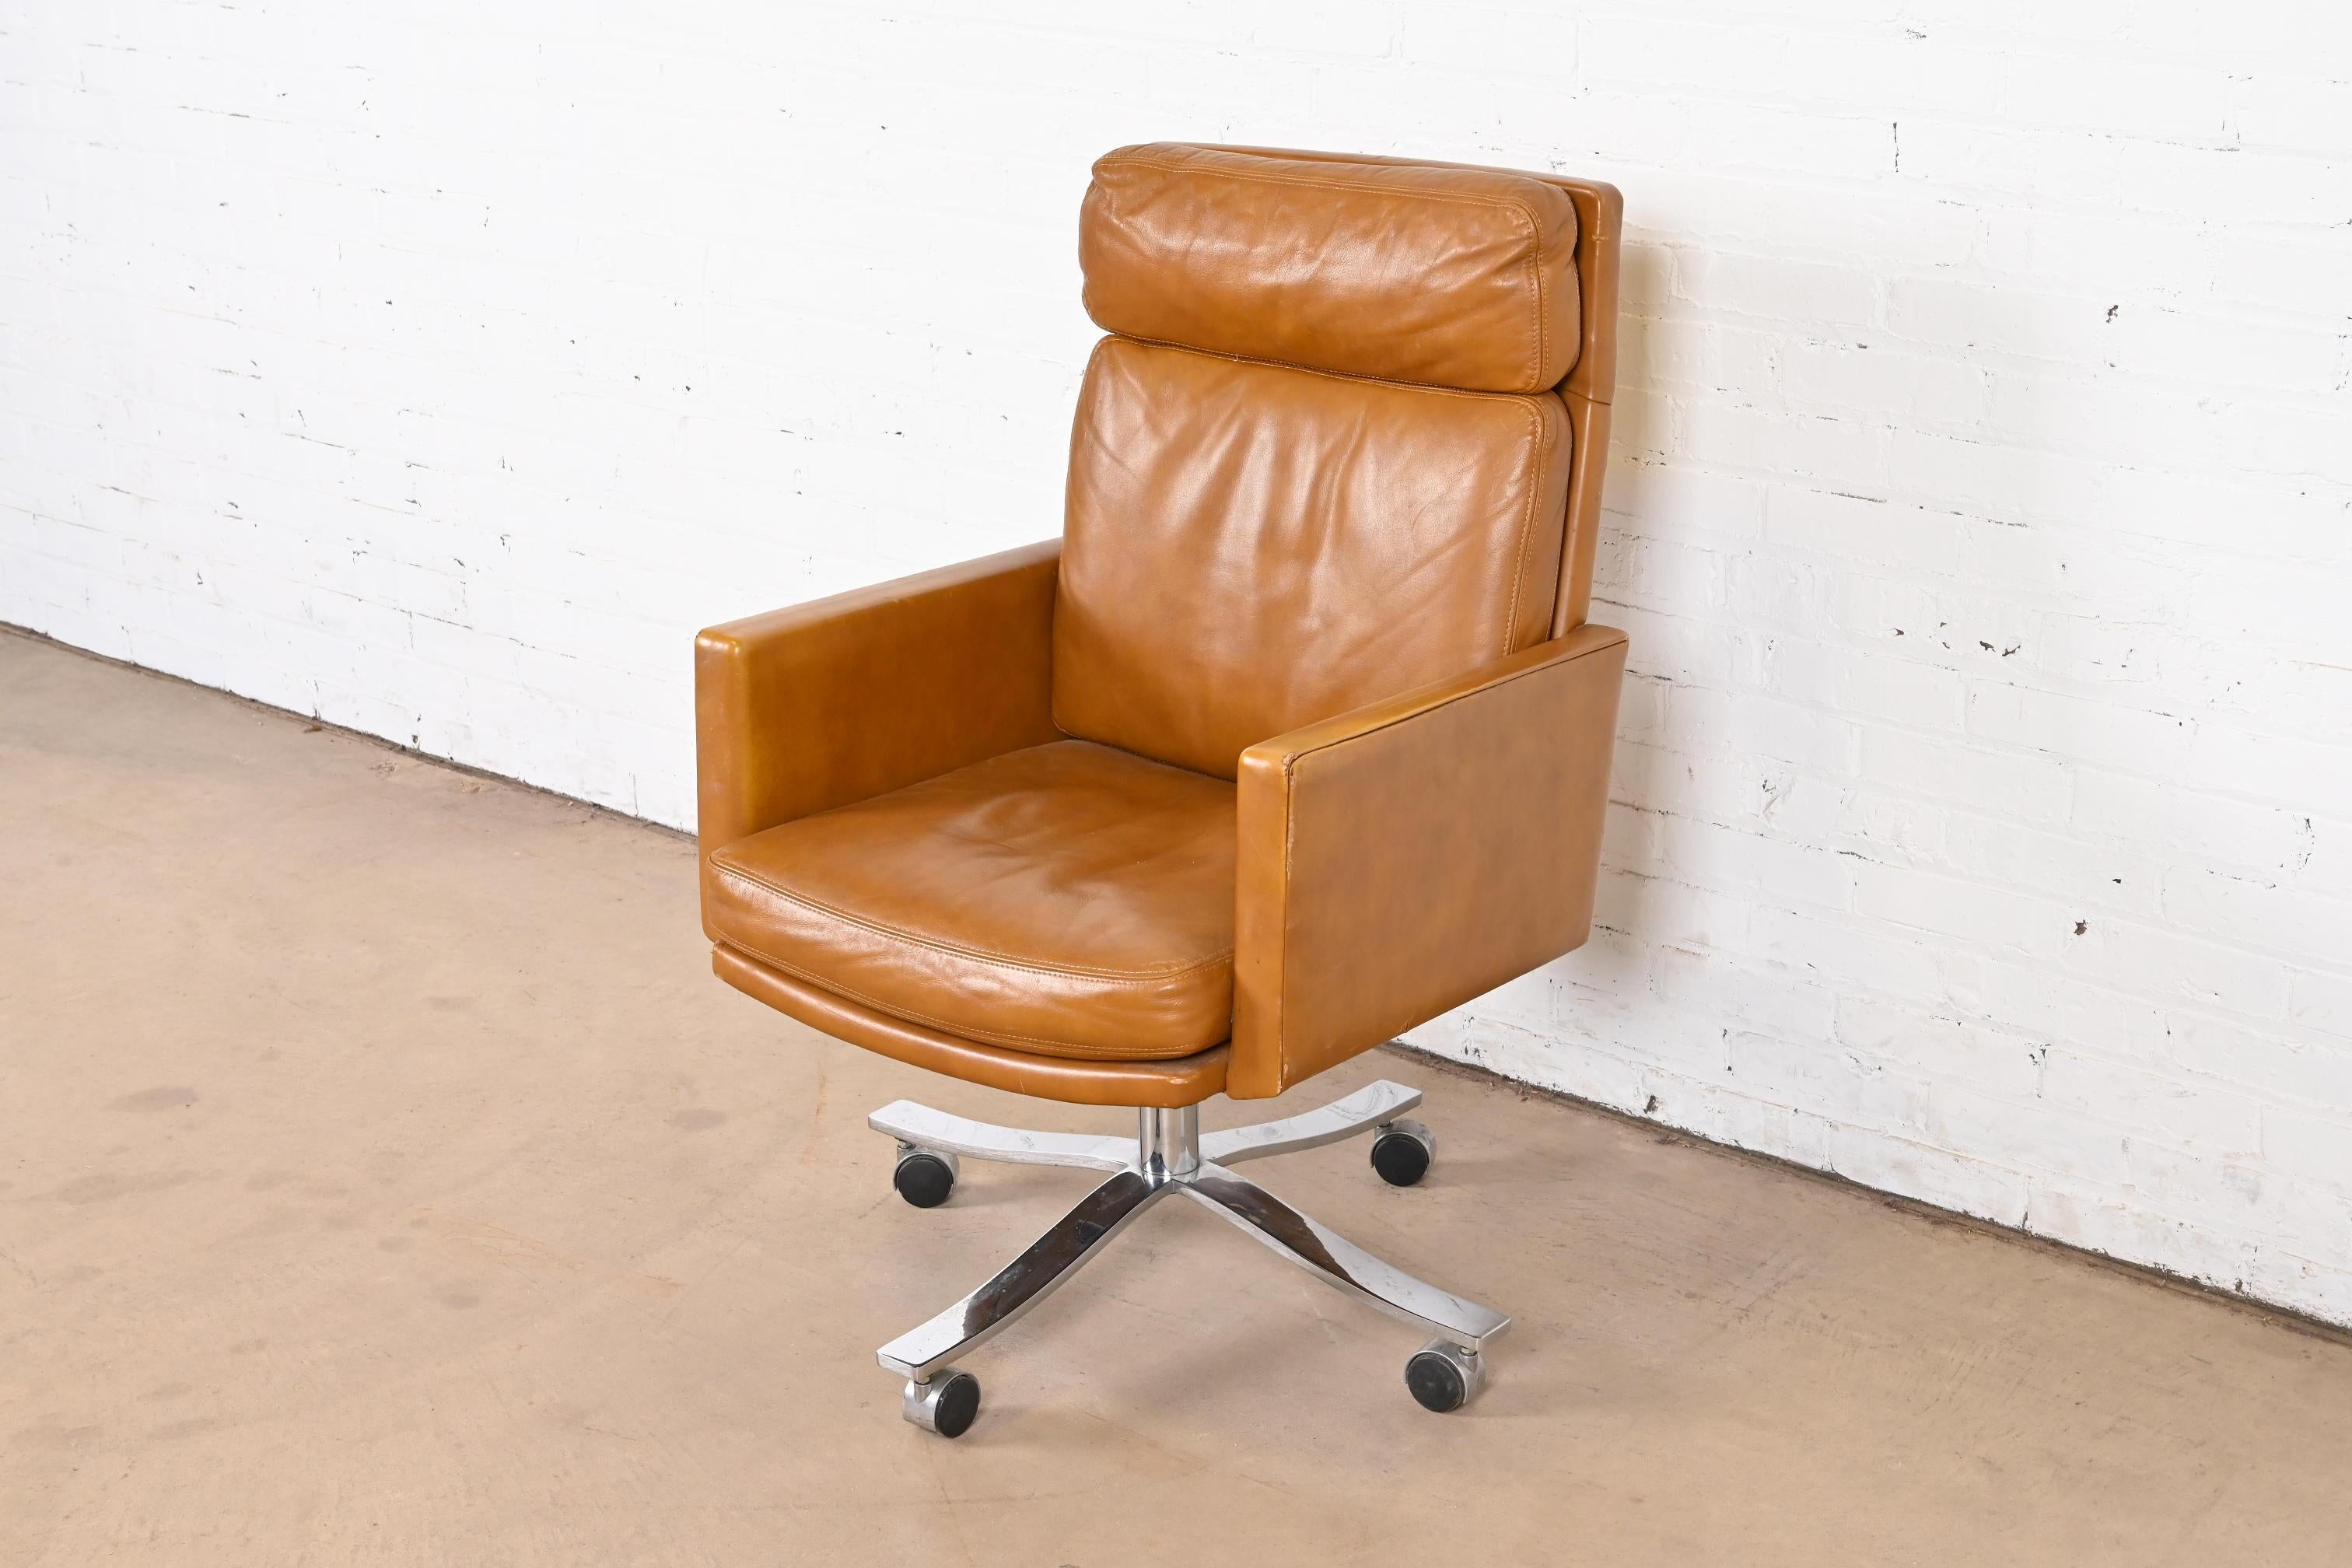 Stow Davis Mid-Century Modern Leather Executive Swivel Desk Chair, Circa 1960s In Good Condition For Sale In South Bend, IN